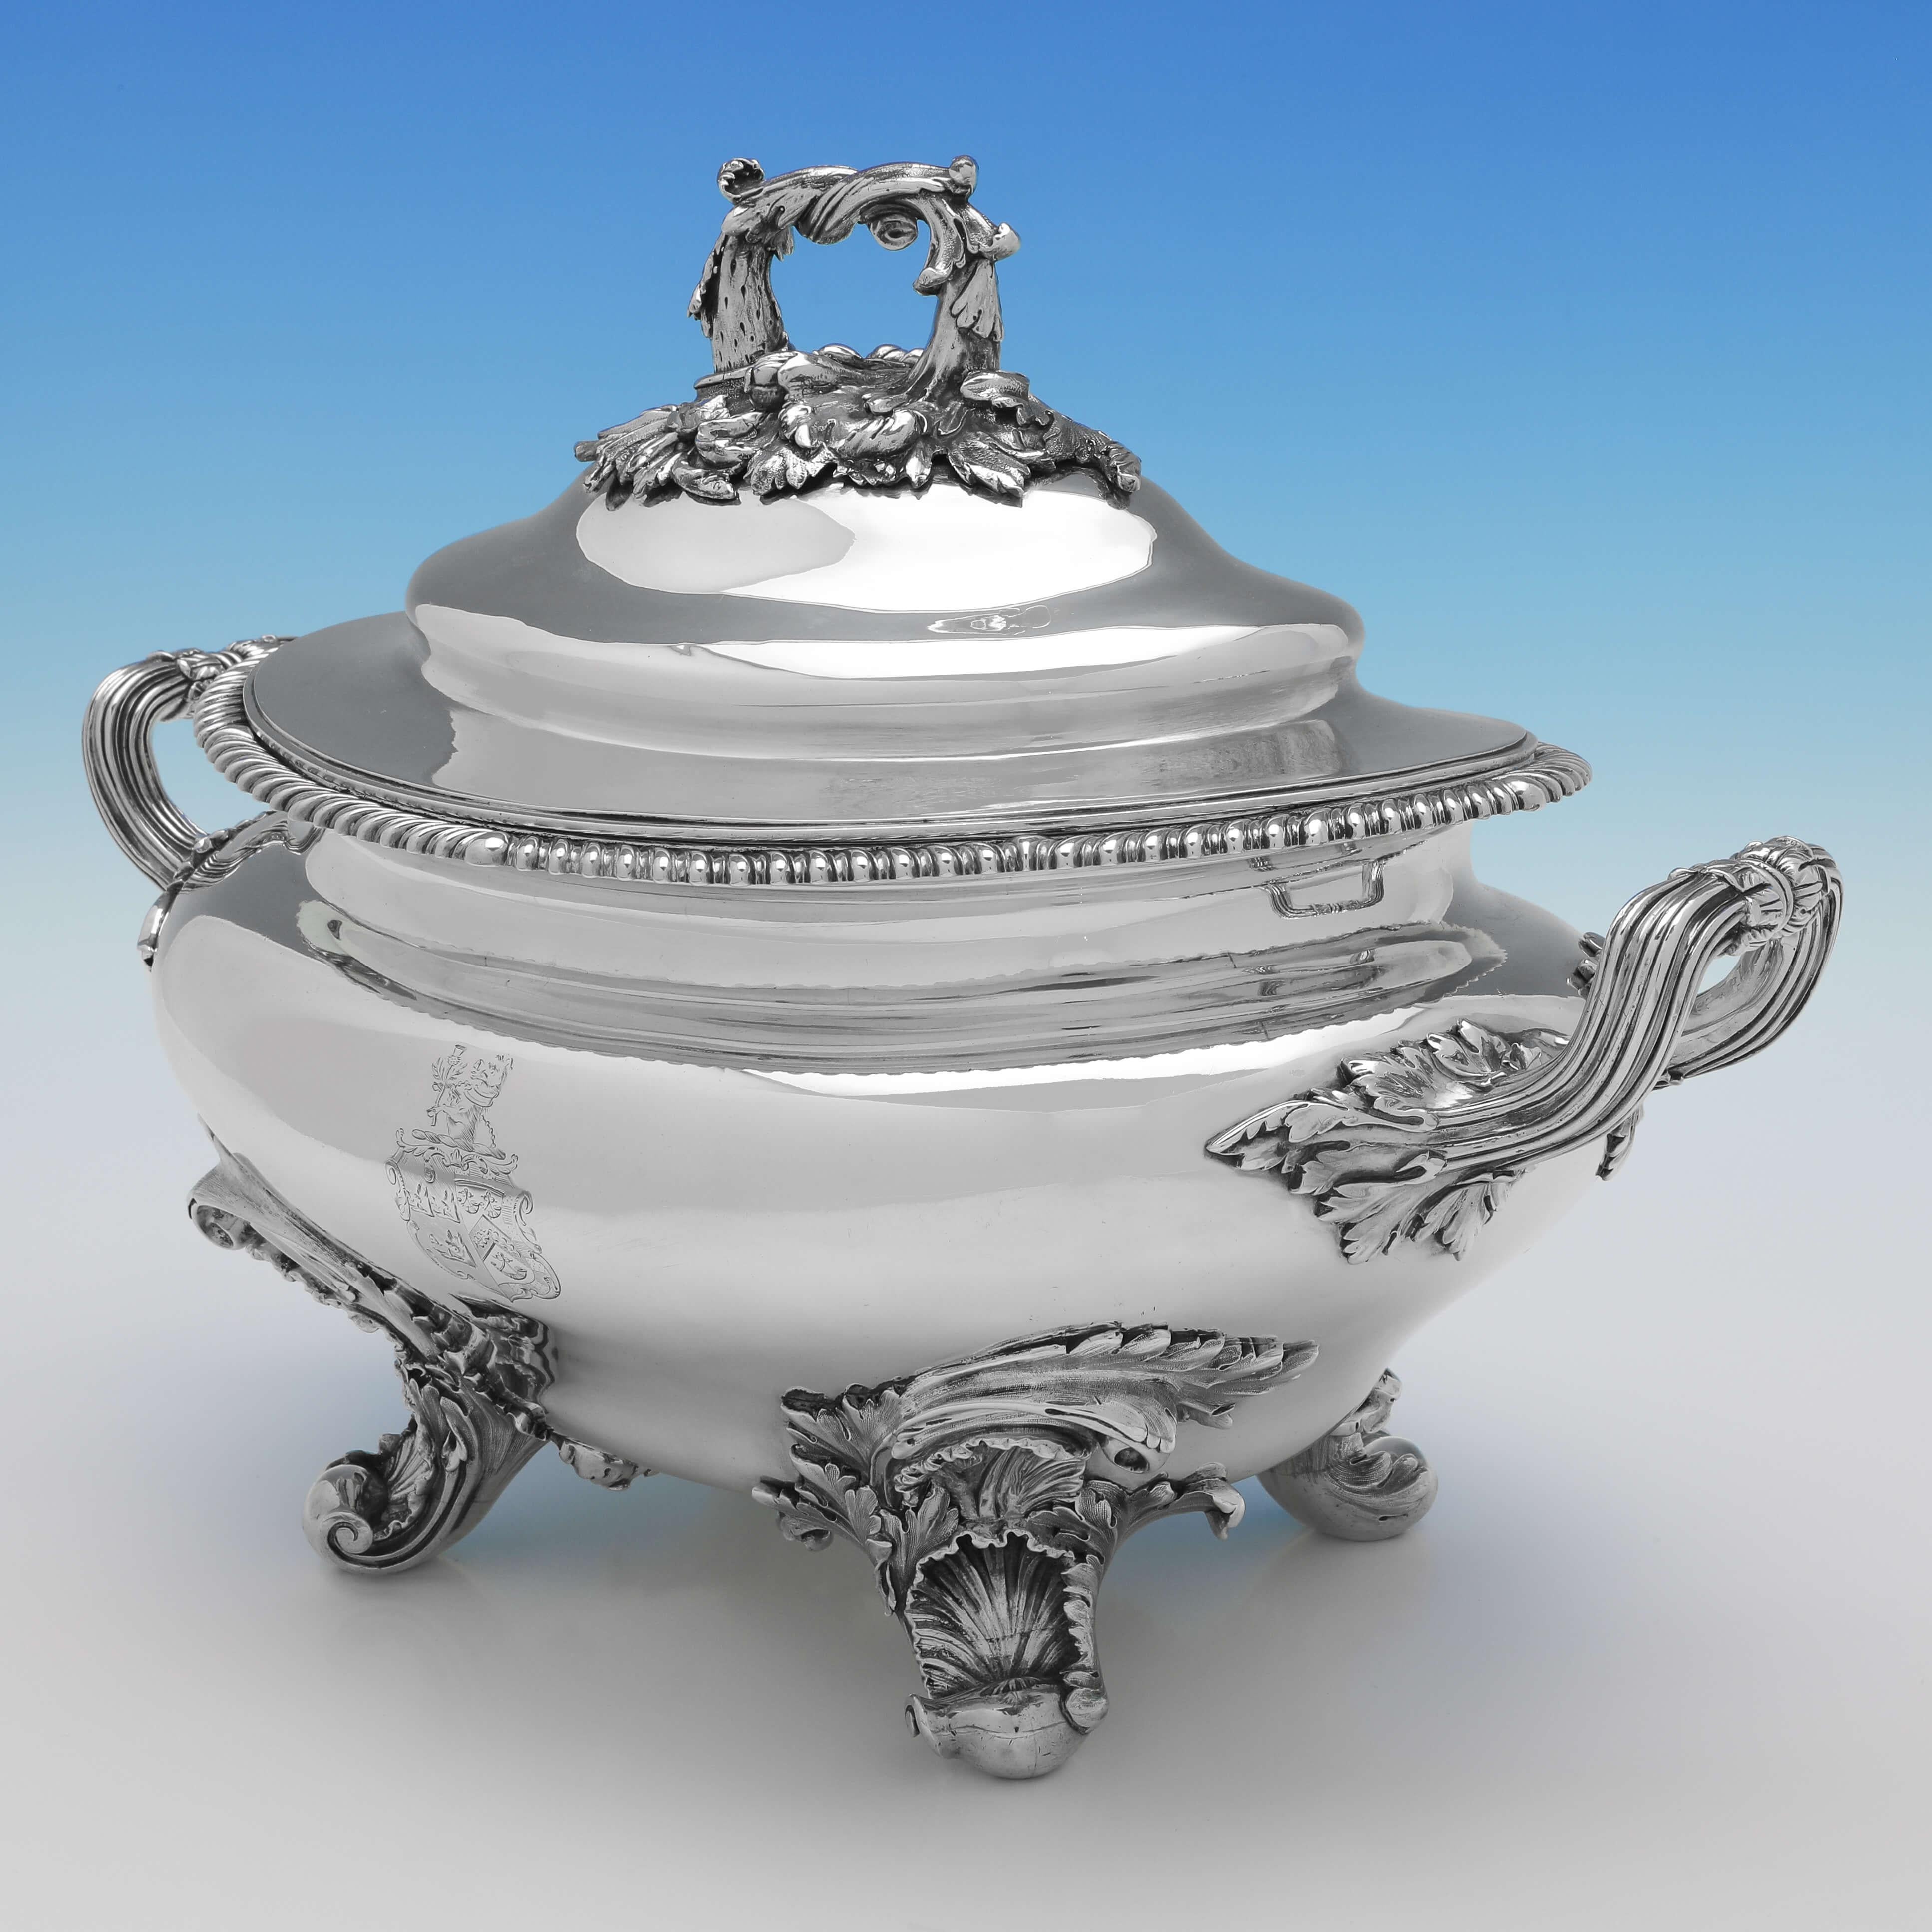 Hallmarked in London in 1835 by Barnards, this superb, William IV, Antique Sterling Silver Soup Tureen, features an ornate cast handle to the lid and ornate cast feet, a gadroon borders, and an engraved coat of arms to the side. The soup tureen